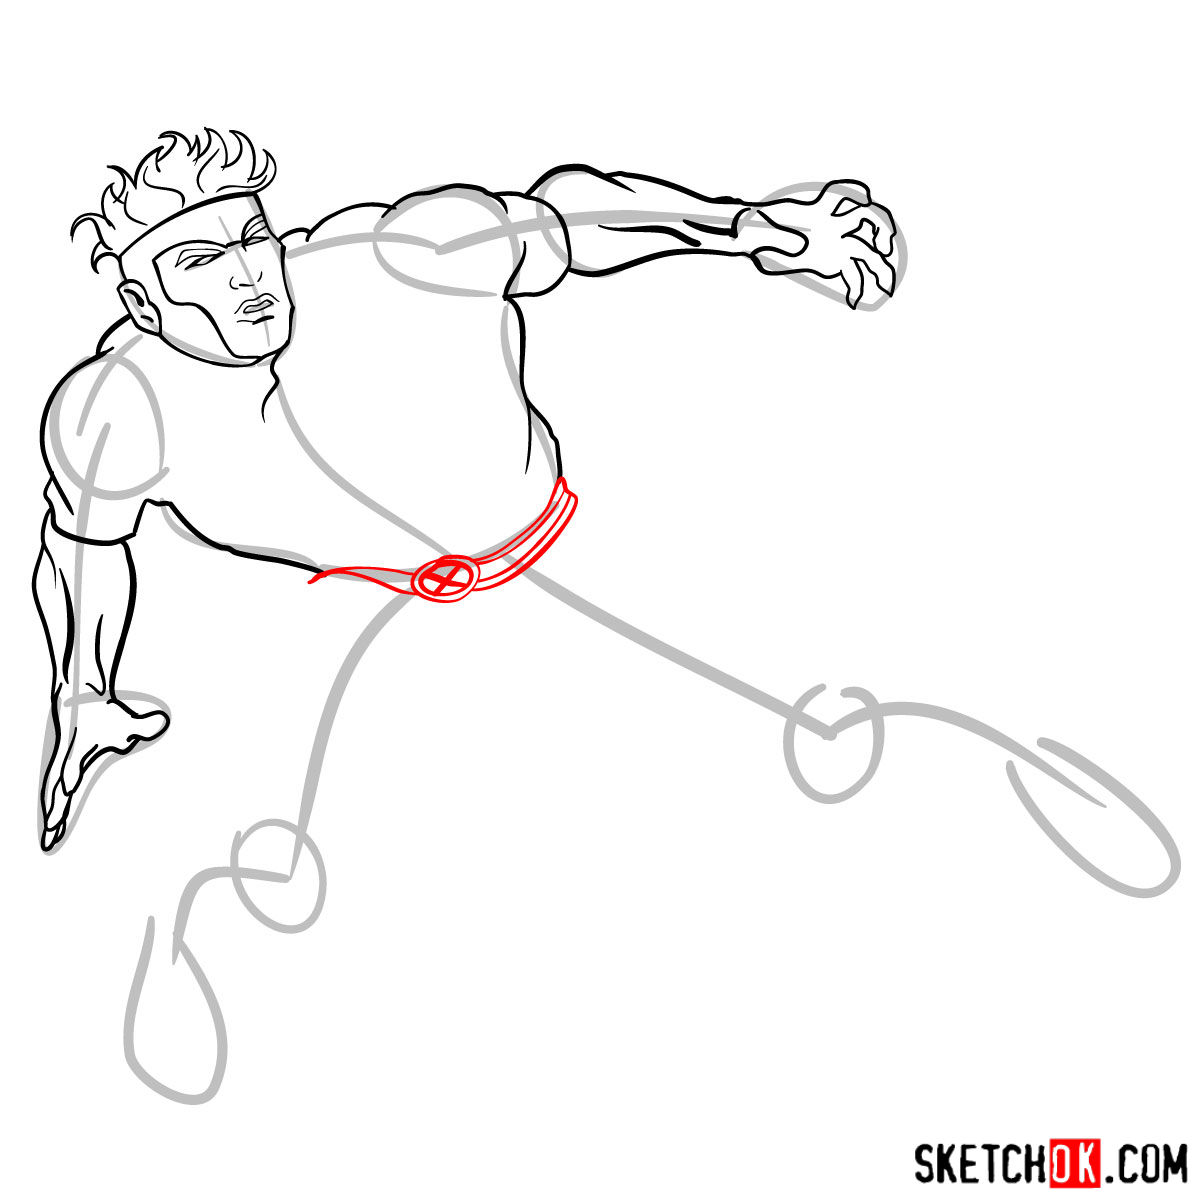 How to draw Havok from X-Men series - step by step tutorial - step 09